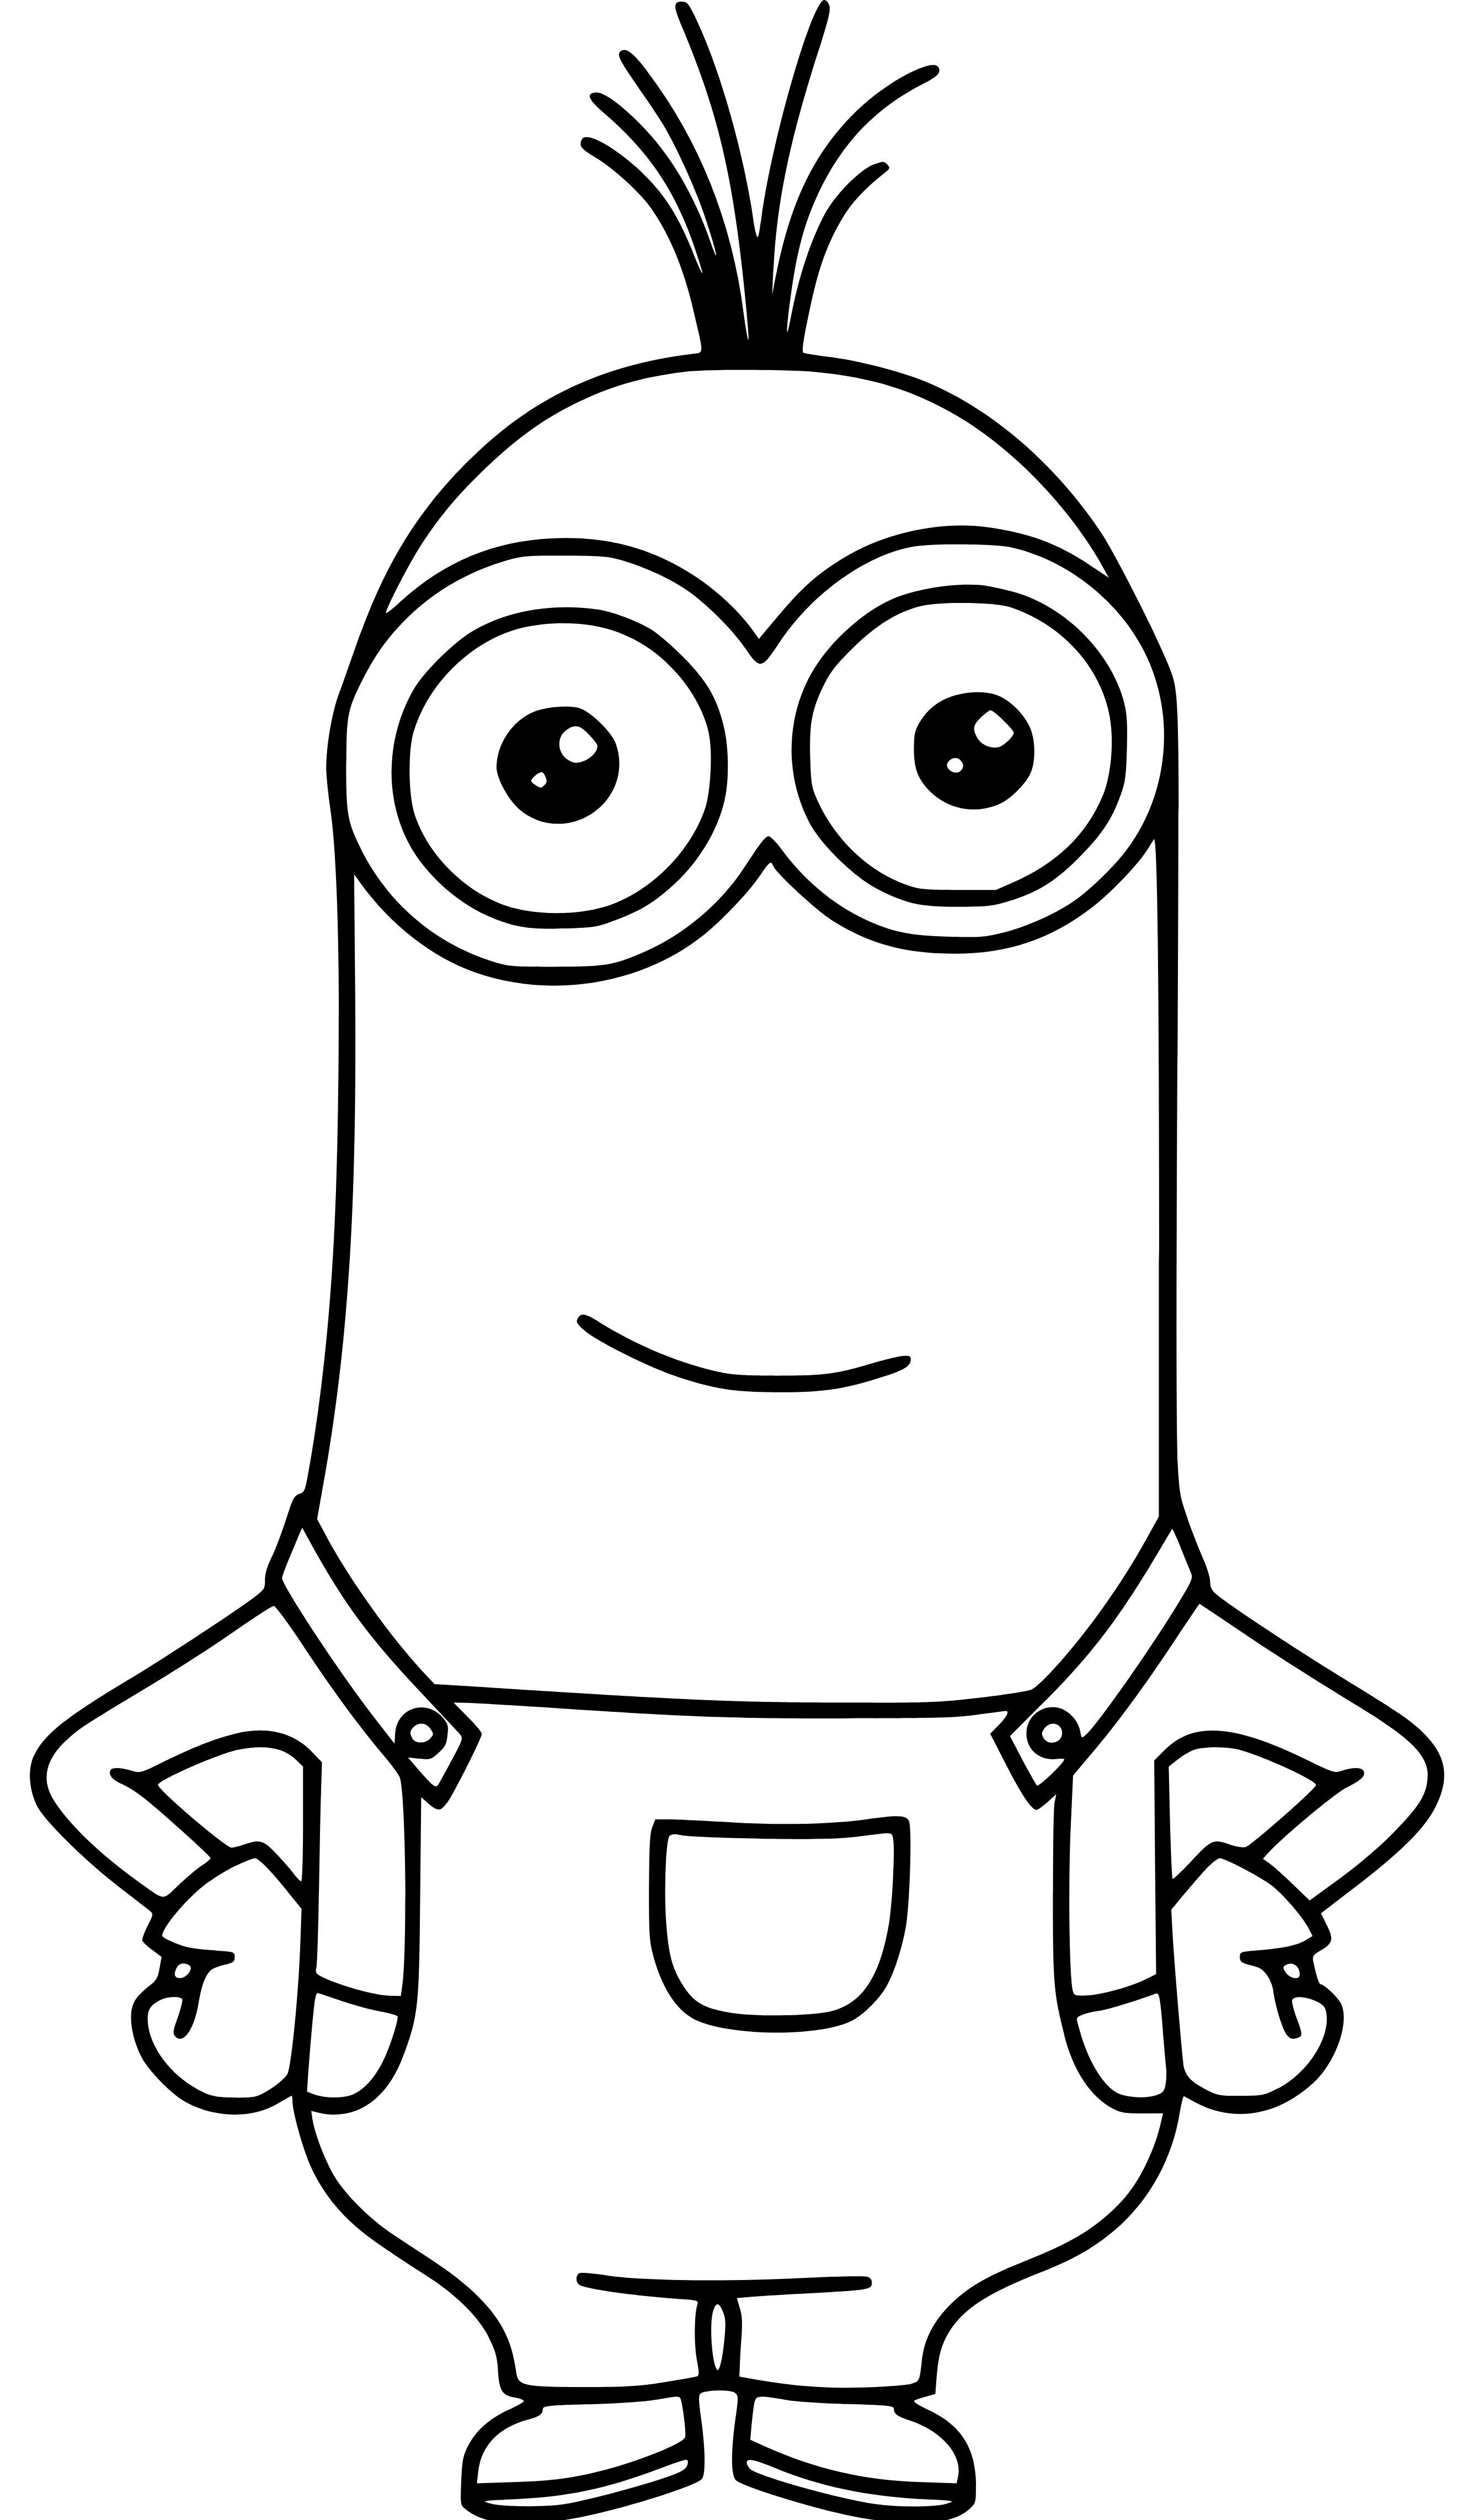 Kevin the Minion Coloring Page for Kids to Print - SheetalColor.com